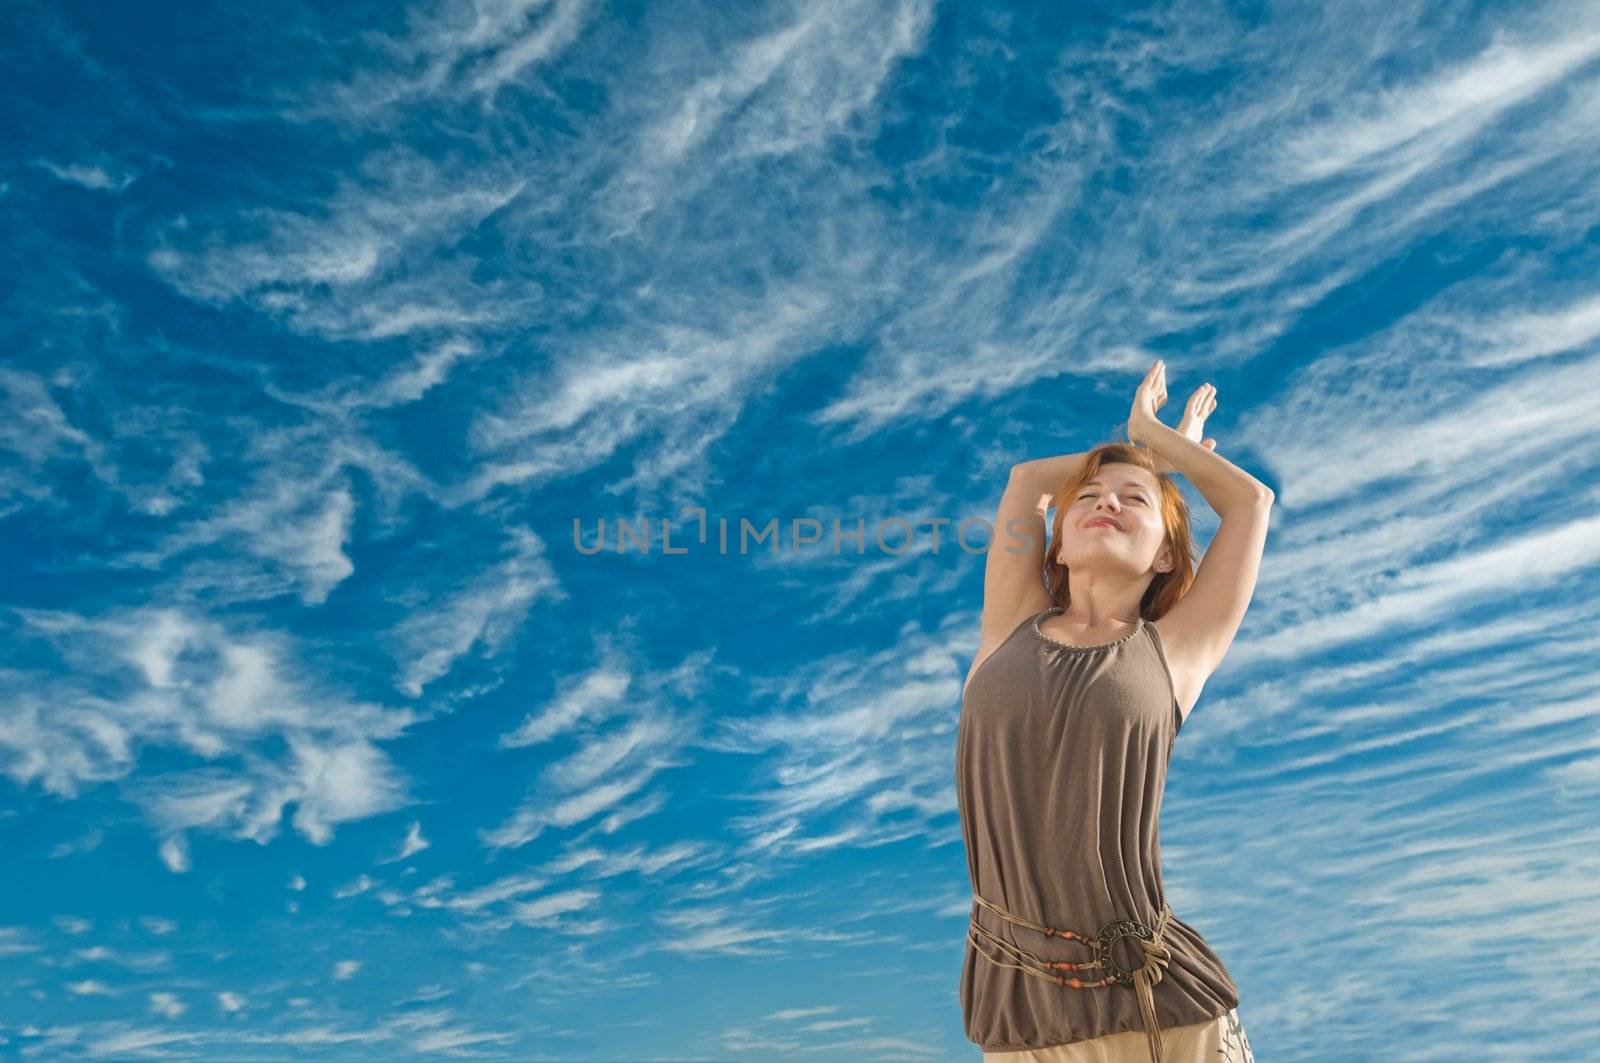 Beautiful young dancer performing yoga-dance outdoors with blue sky and clouds in the background